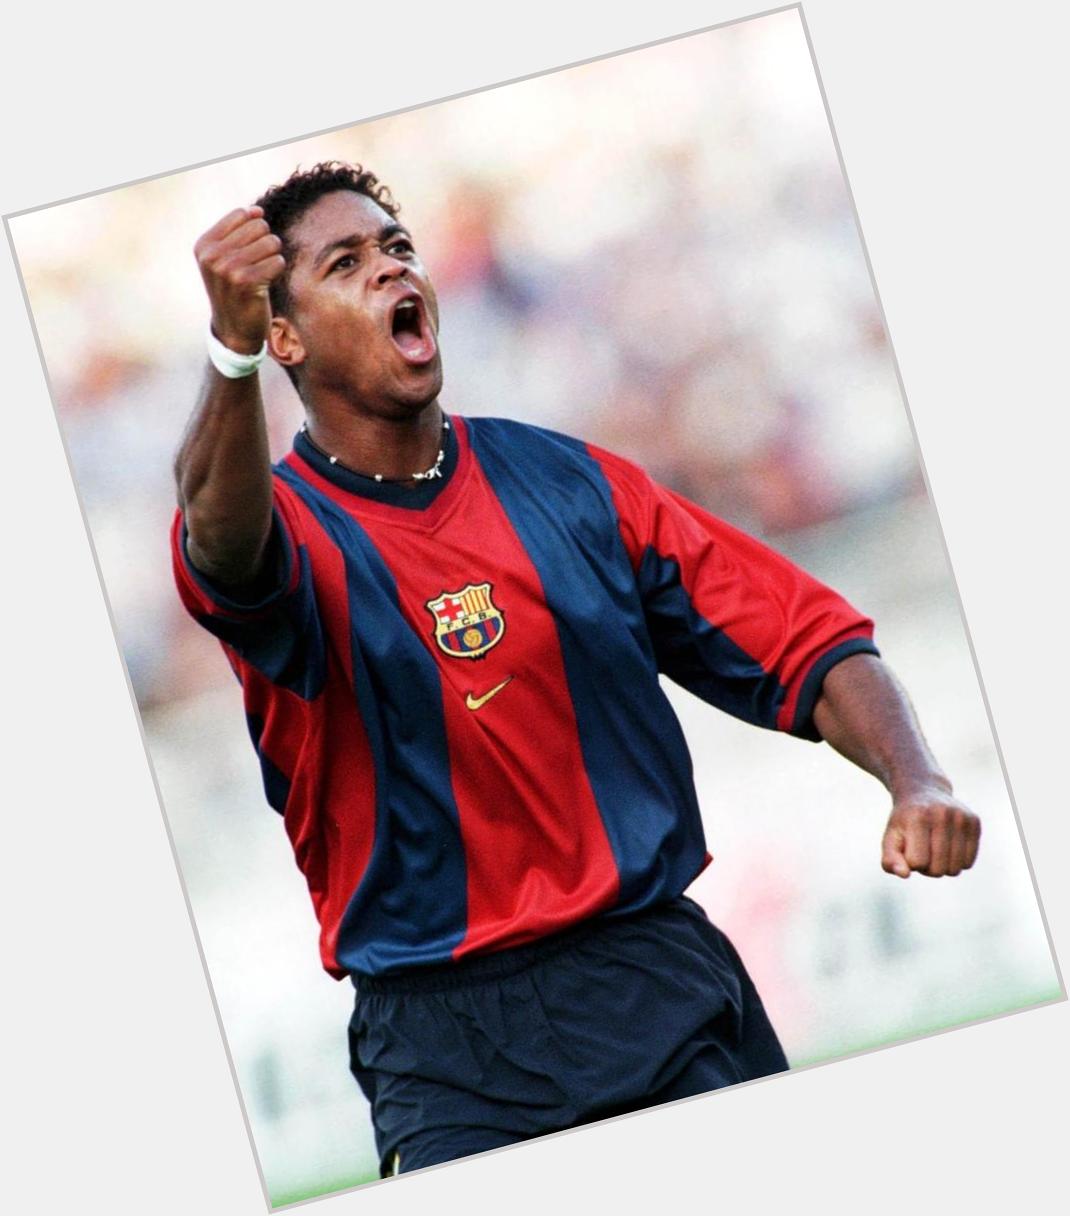 Happy birthday to our former player, the legend Patrick Kluivert who turns 45 years old   